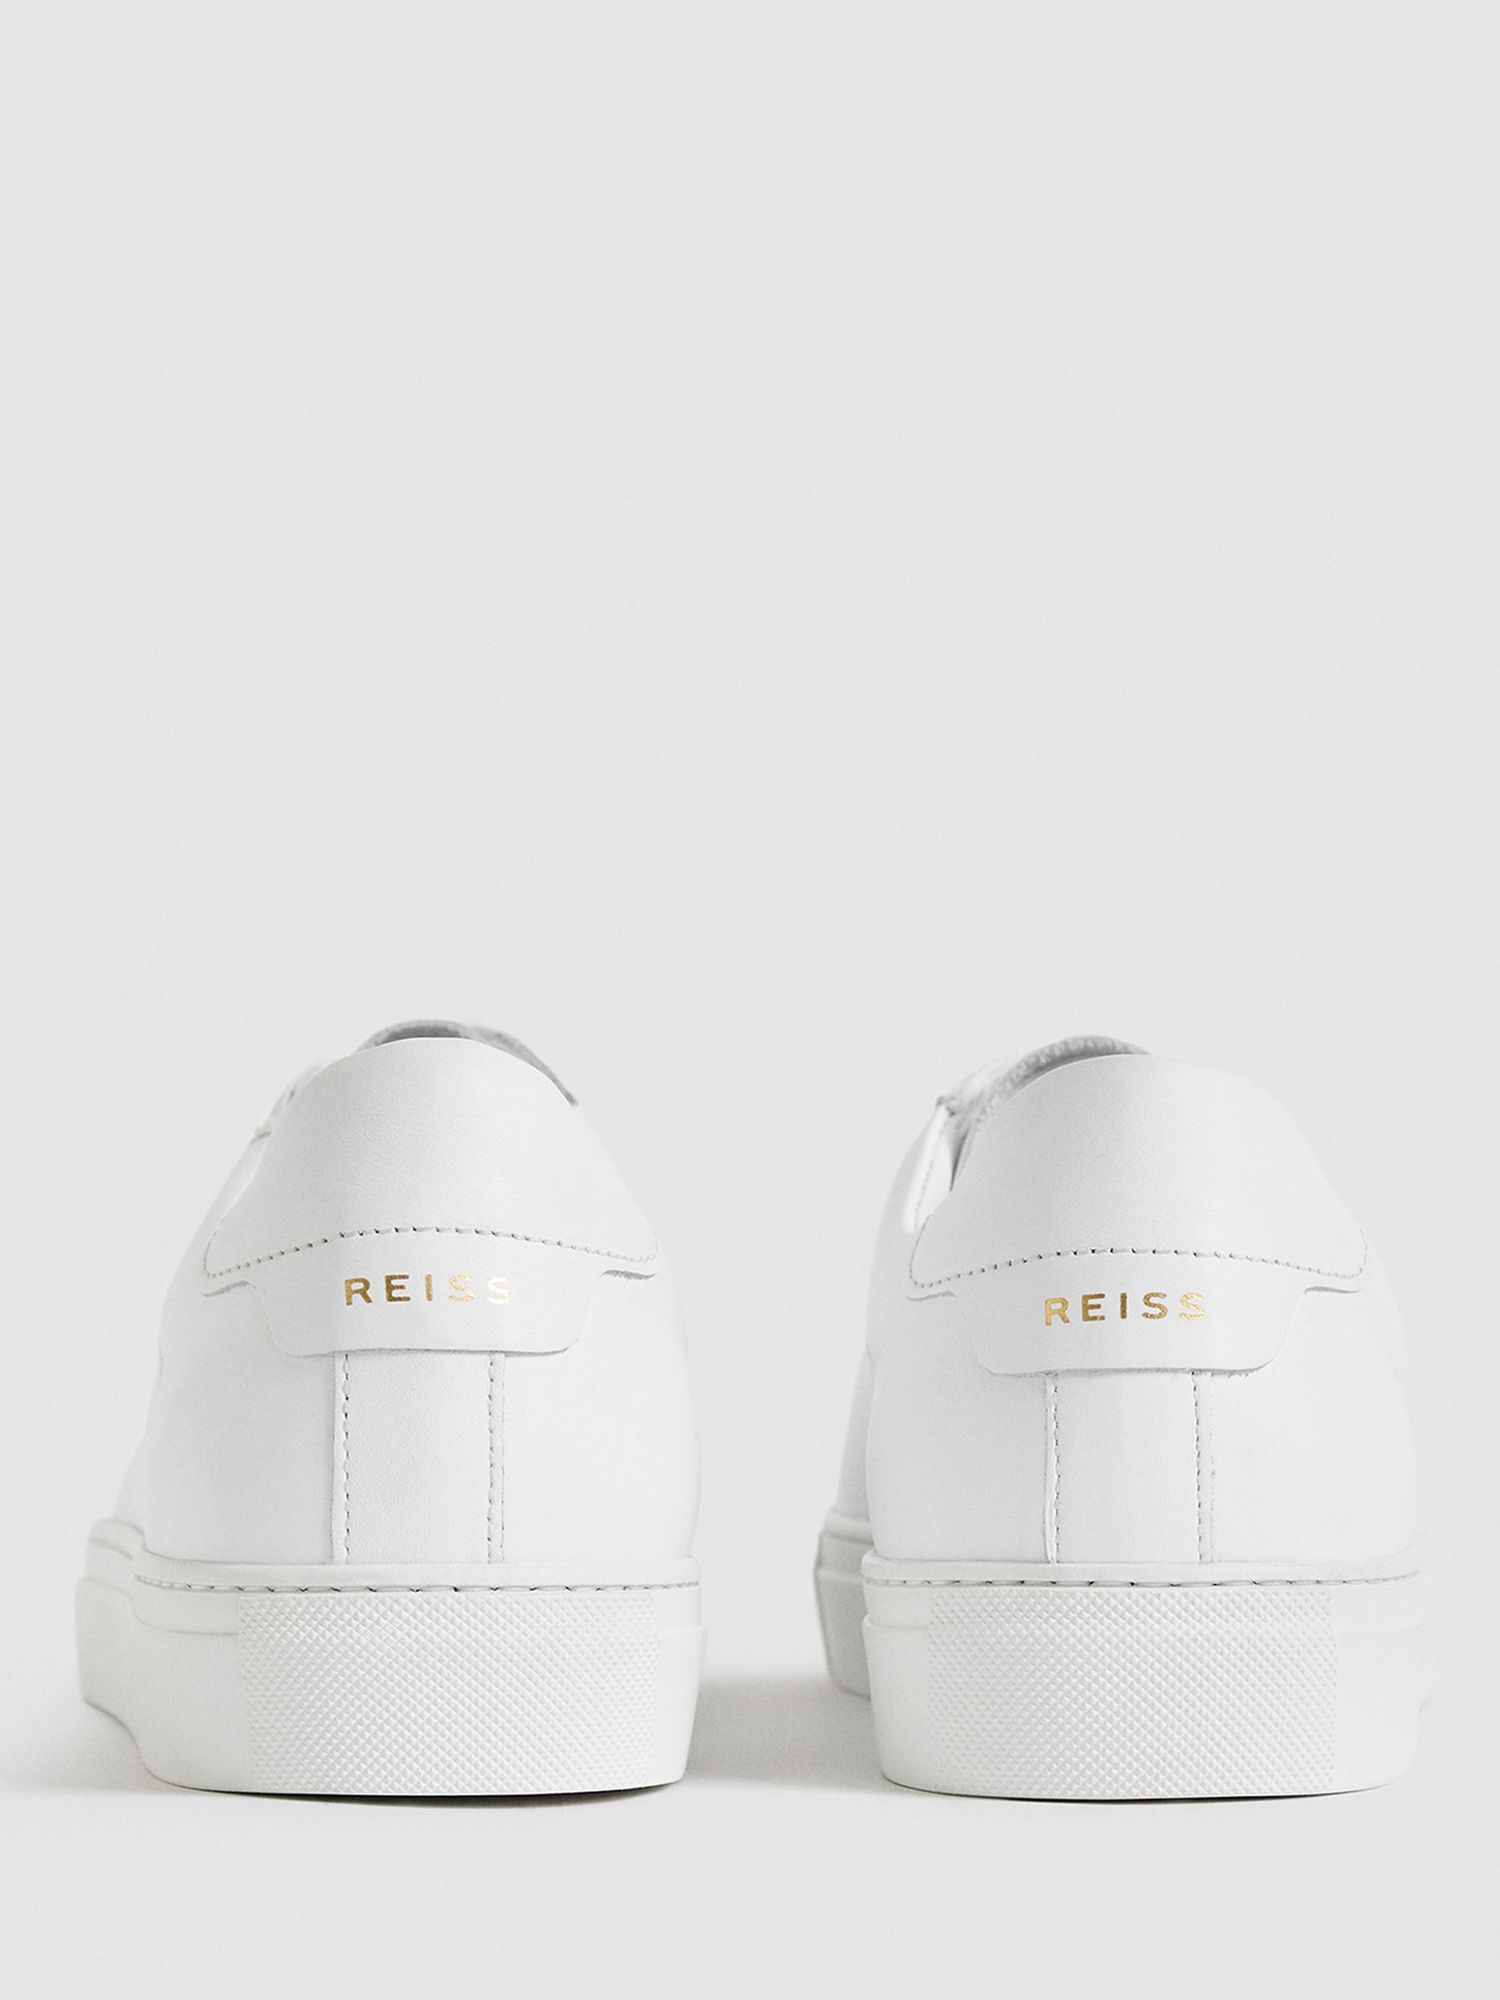 Reiss Finley Leather Trainers, White at John Lewis & Partners